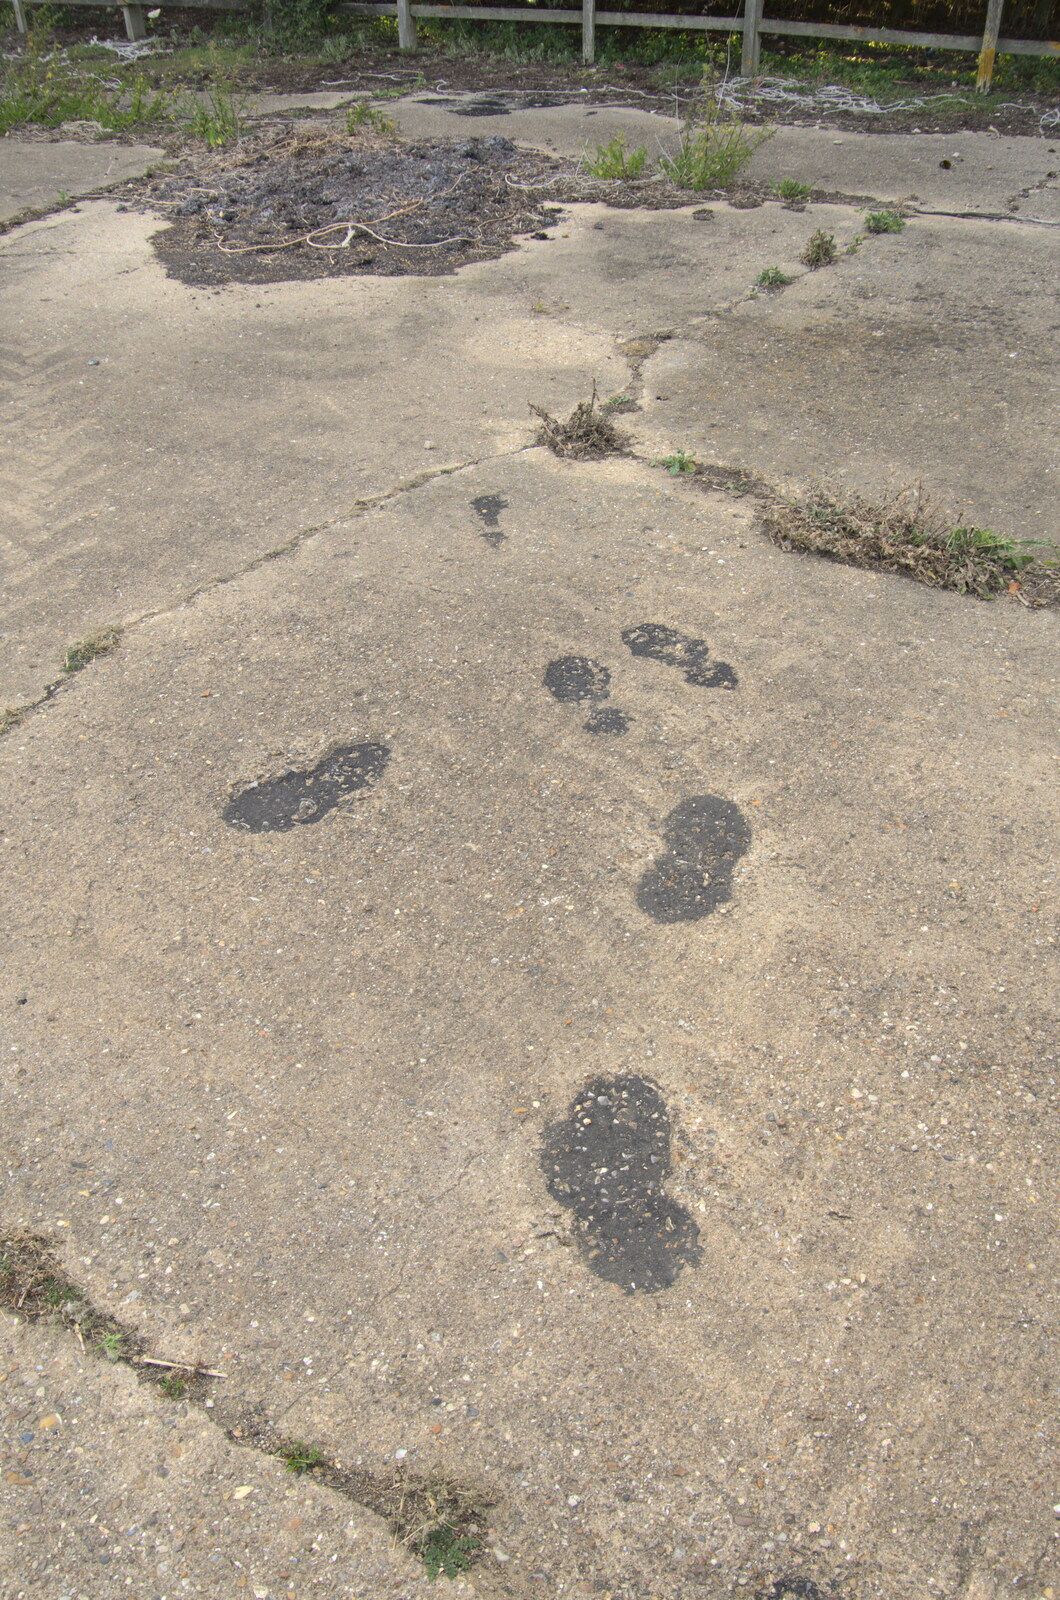 Footprints in the concrete from when it was built from Eye Airfield with Mick the Brick, Eye, Suffolk - 5th August 2020